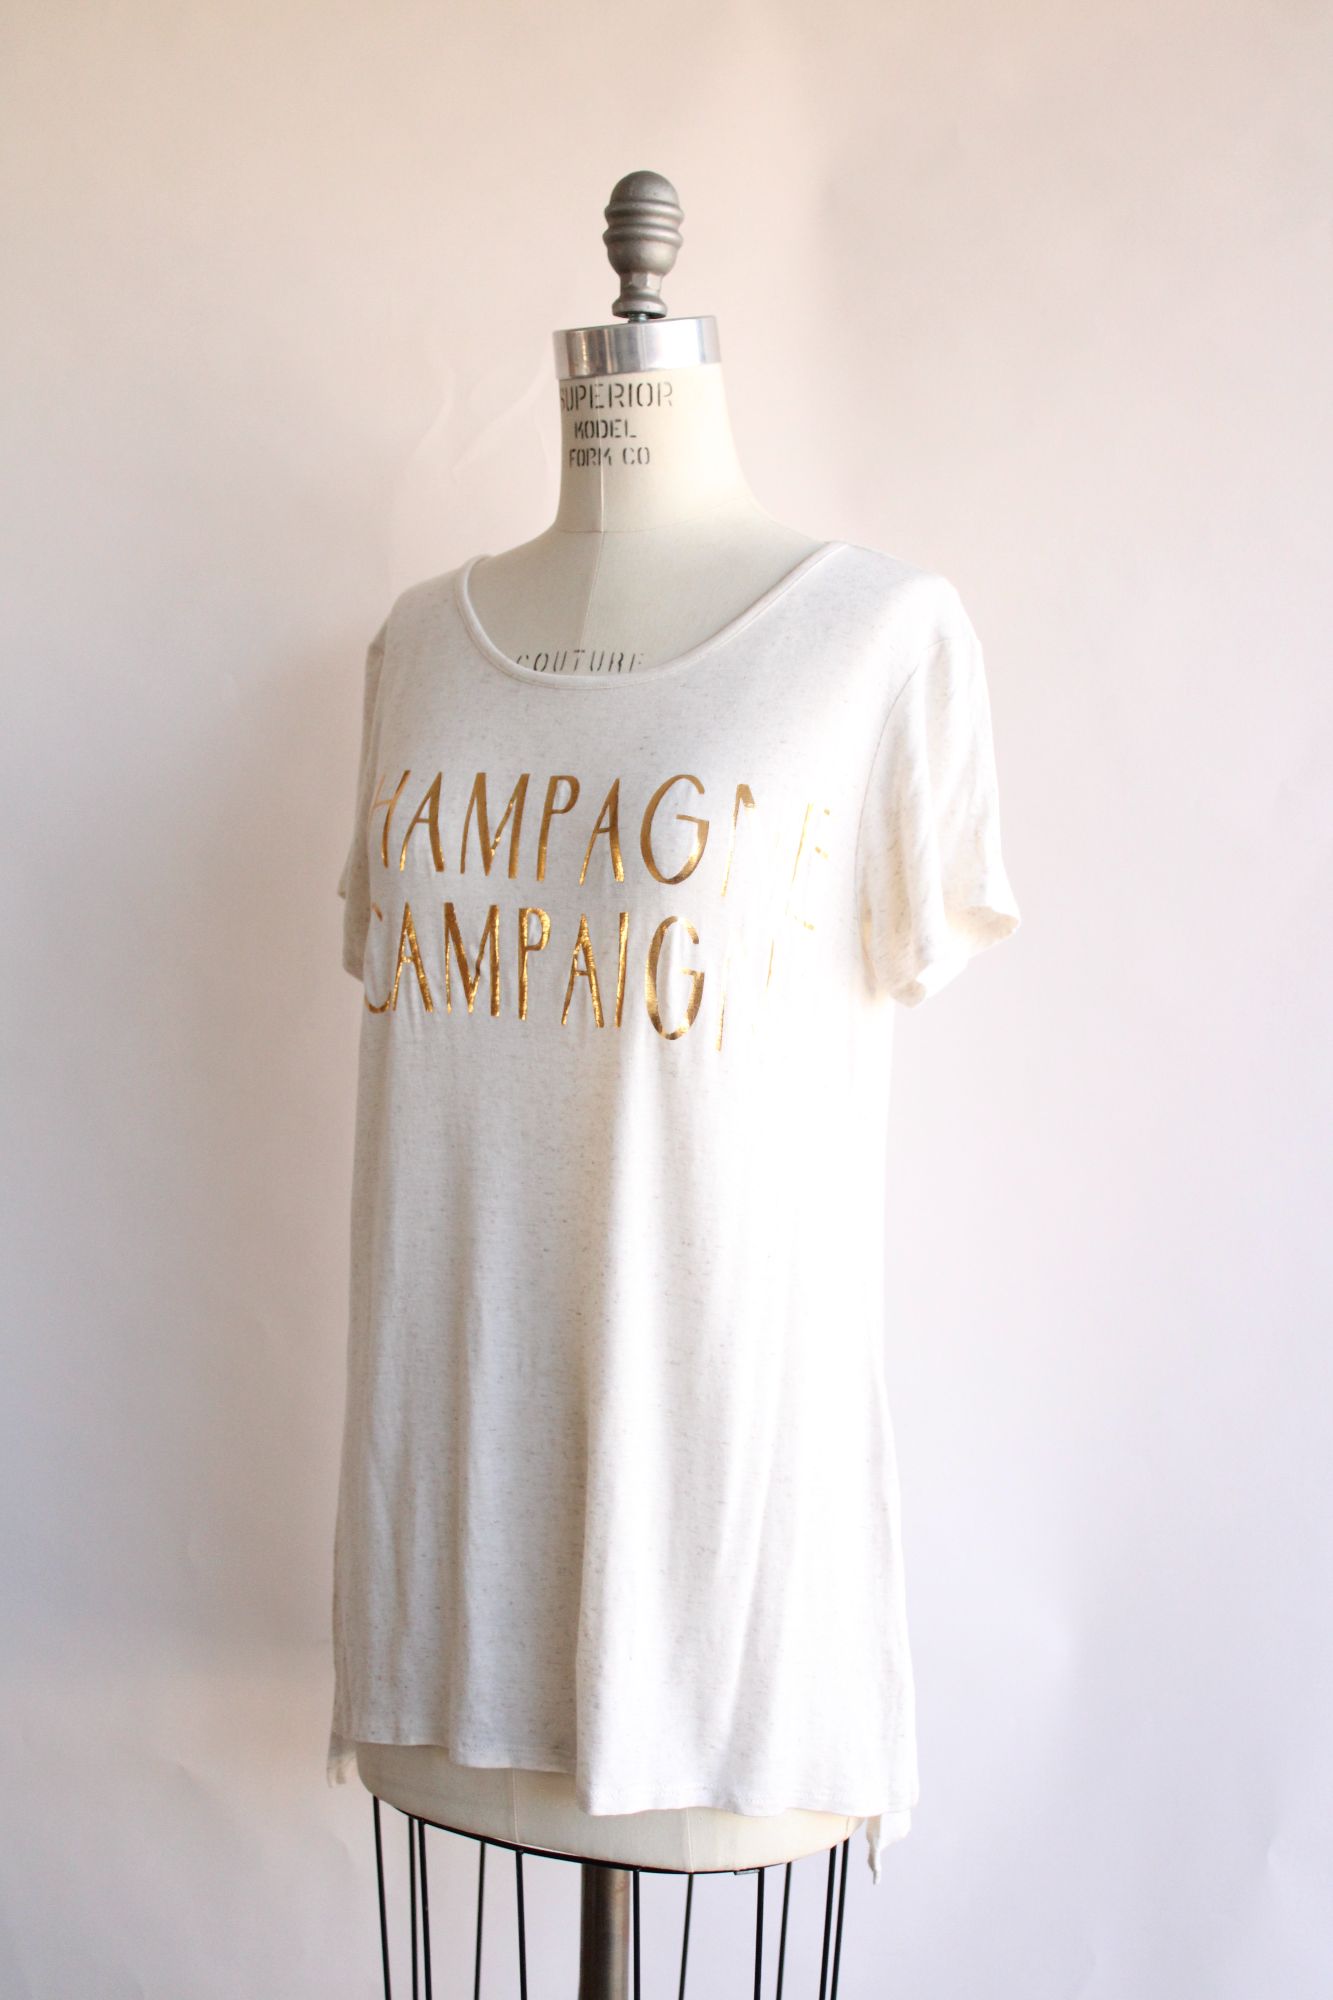 Mi ami womens T Shirt, Champagne Campaign, Size M, Ivory with gold letters